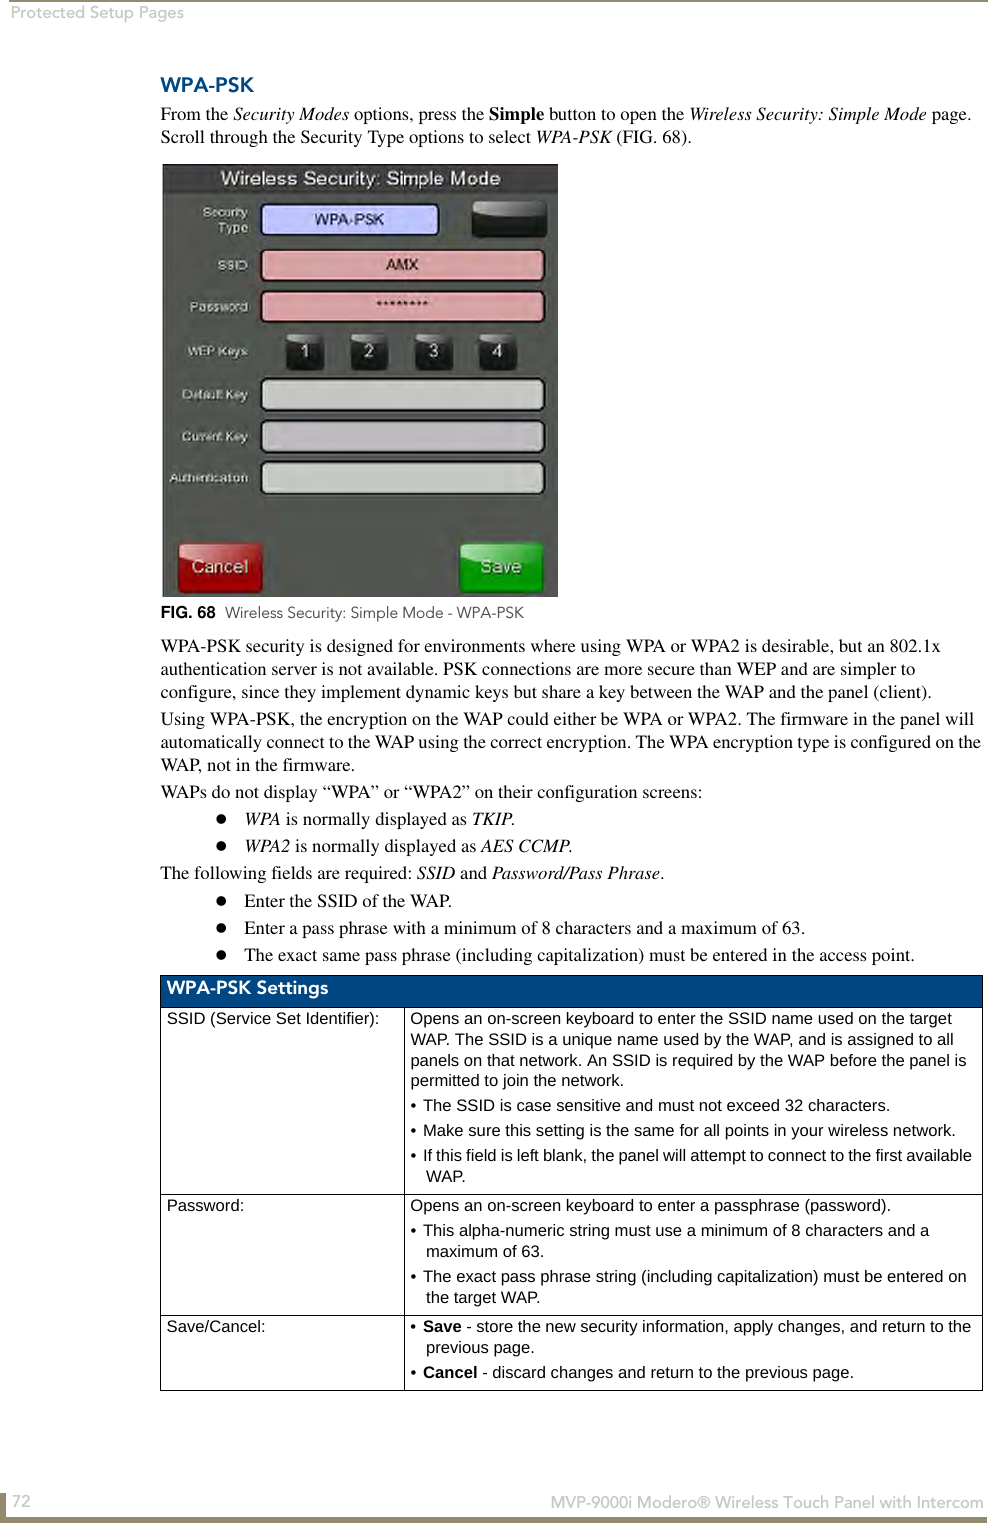 Protected Setup Pages72  MVP-9000i Modero® Wireless Touch Panel with IntercomWPA-PSKFrom the Security Modes options, press the Simple button to open the Wireless Security: Simple Mode page. Scroll through the Security Type options to select WPA-PSK (FIG. 68).  WPA-PSK security is designed for environments where using WPA or WPA2 is desirable, but an 802.1x authentication server is not available. PSK connections are more secure than WEP and are simpler to configure, since they implement dynamic keys but share a key between the WAP and the panel (client).Using WPA-PSK, the encryption on the WAP could either be WPA or WPA2. The firmware in the panel will automatically connect to the WAP using the correct encryption. The WPA encryption type is configured on the WAP, not in the firmware.WAPs do not display “WPA” or “WPA2” on their configuration screens:WPA is normally displayed as TKIP. WPA2 is normally displayed as AES CCMP.The following fields are required: SSID and Password/Pass Phrase.Enter the SSID of the WAP.Enter a pass phrase with a minimum of 8 characters and a maximum of 63.The exact same pass phrase (including capitalization) must be entered in the access point. FIG. 68  Wireless Security: Simple Mode - WPA-PSKWPA-PSK SettingsSSID (Service Set Identifier): Opens an on-screen keyboard to enter the SSID name used on the target WAP. The SSID is a unique name used by the WAP, and is assigned to all panels on that network. An SSID is required by the WAP before the panel is permitted to join the network. • The SSID is case sensitive and must not exceed 32 characters. • Make sure this setting is the same for all points in your wireless network.• If this field is left blank, the panel will attempt to connect to the first available WAP.Password: Opens an on-screen keyboard to enter a passphrase (password).• This alpha-numeric string must use a minimum of 8 characters and a maximum of 63. • The exact pass phrase string (including capitalization) must be entered on the target WAP.Save/Cancel: • Save - store the new security information, apply changes, and return to the previous page.•Cancel - discard changes and return to the previous page.